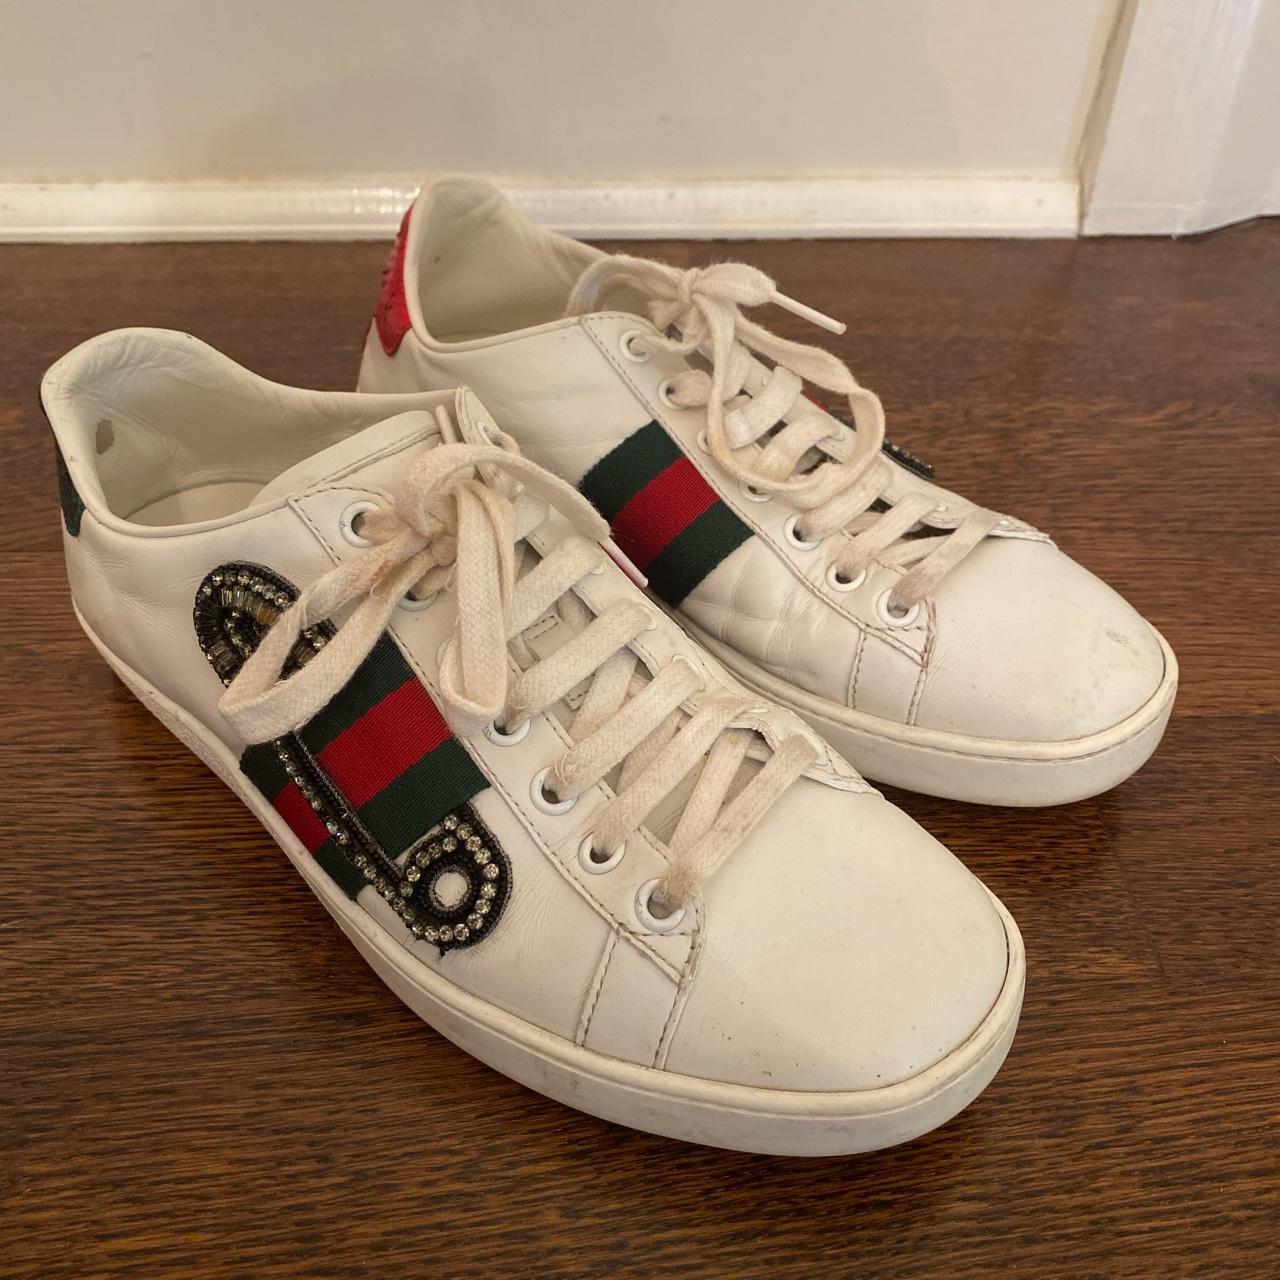 Gucci Football Boots Shoes Sneakers Trainers - Depop